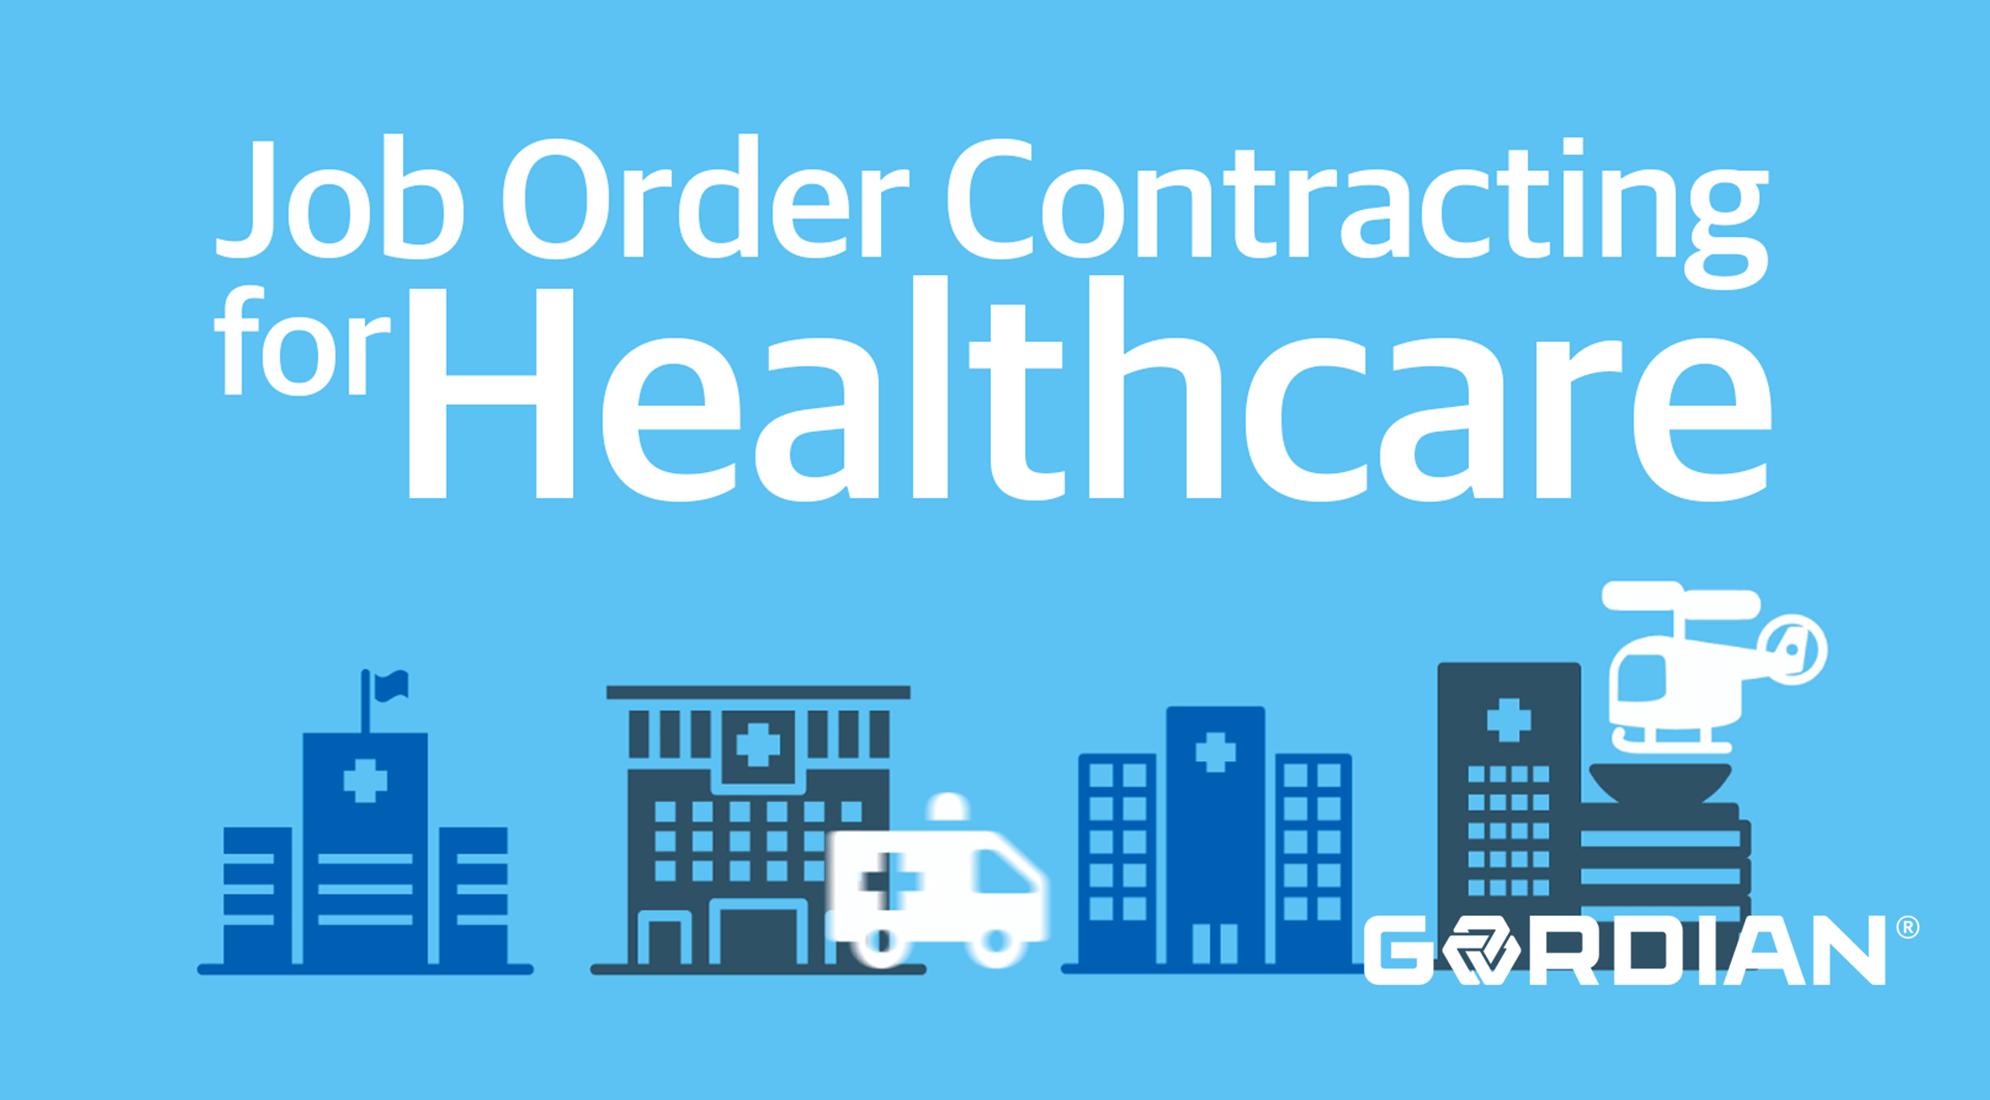 Benefits of Job Order Contracting for Healthcare